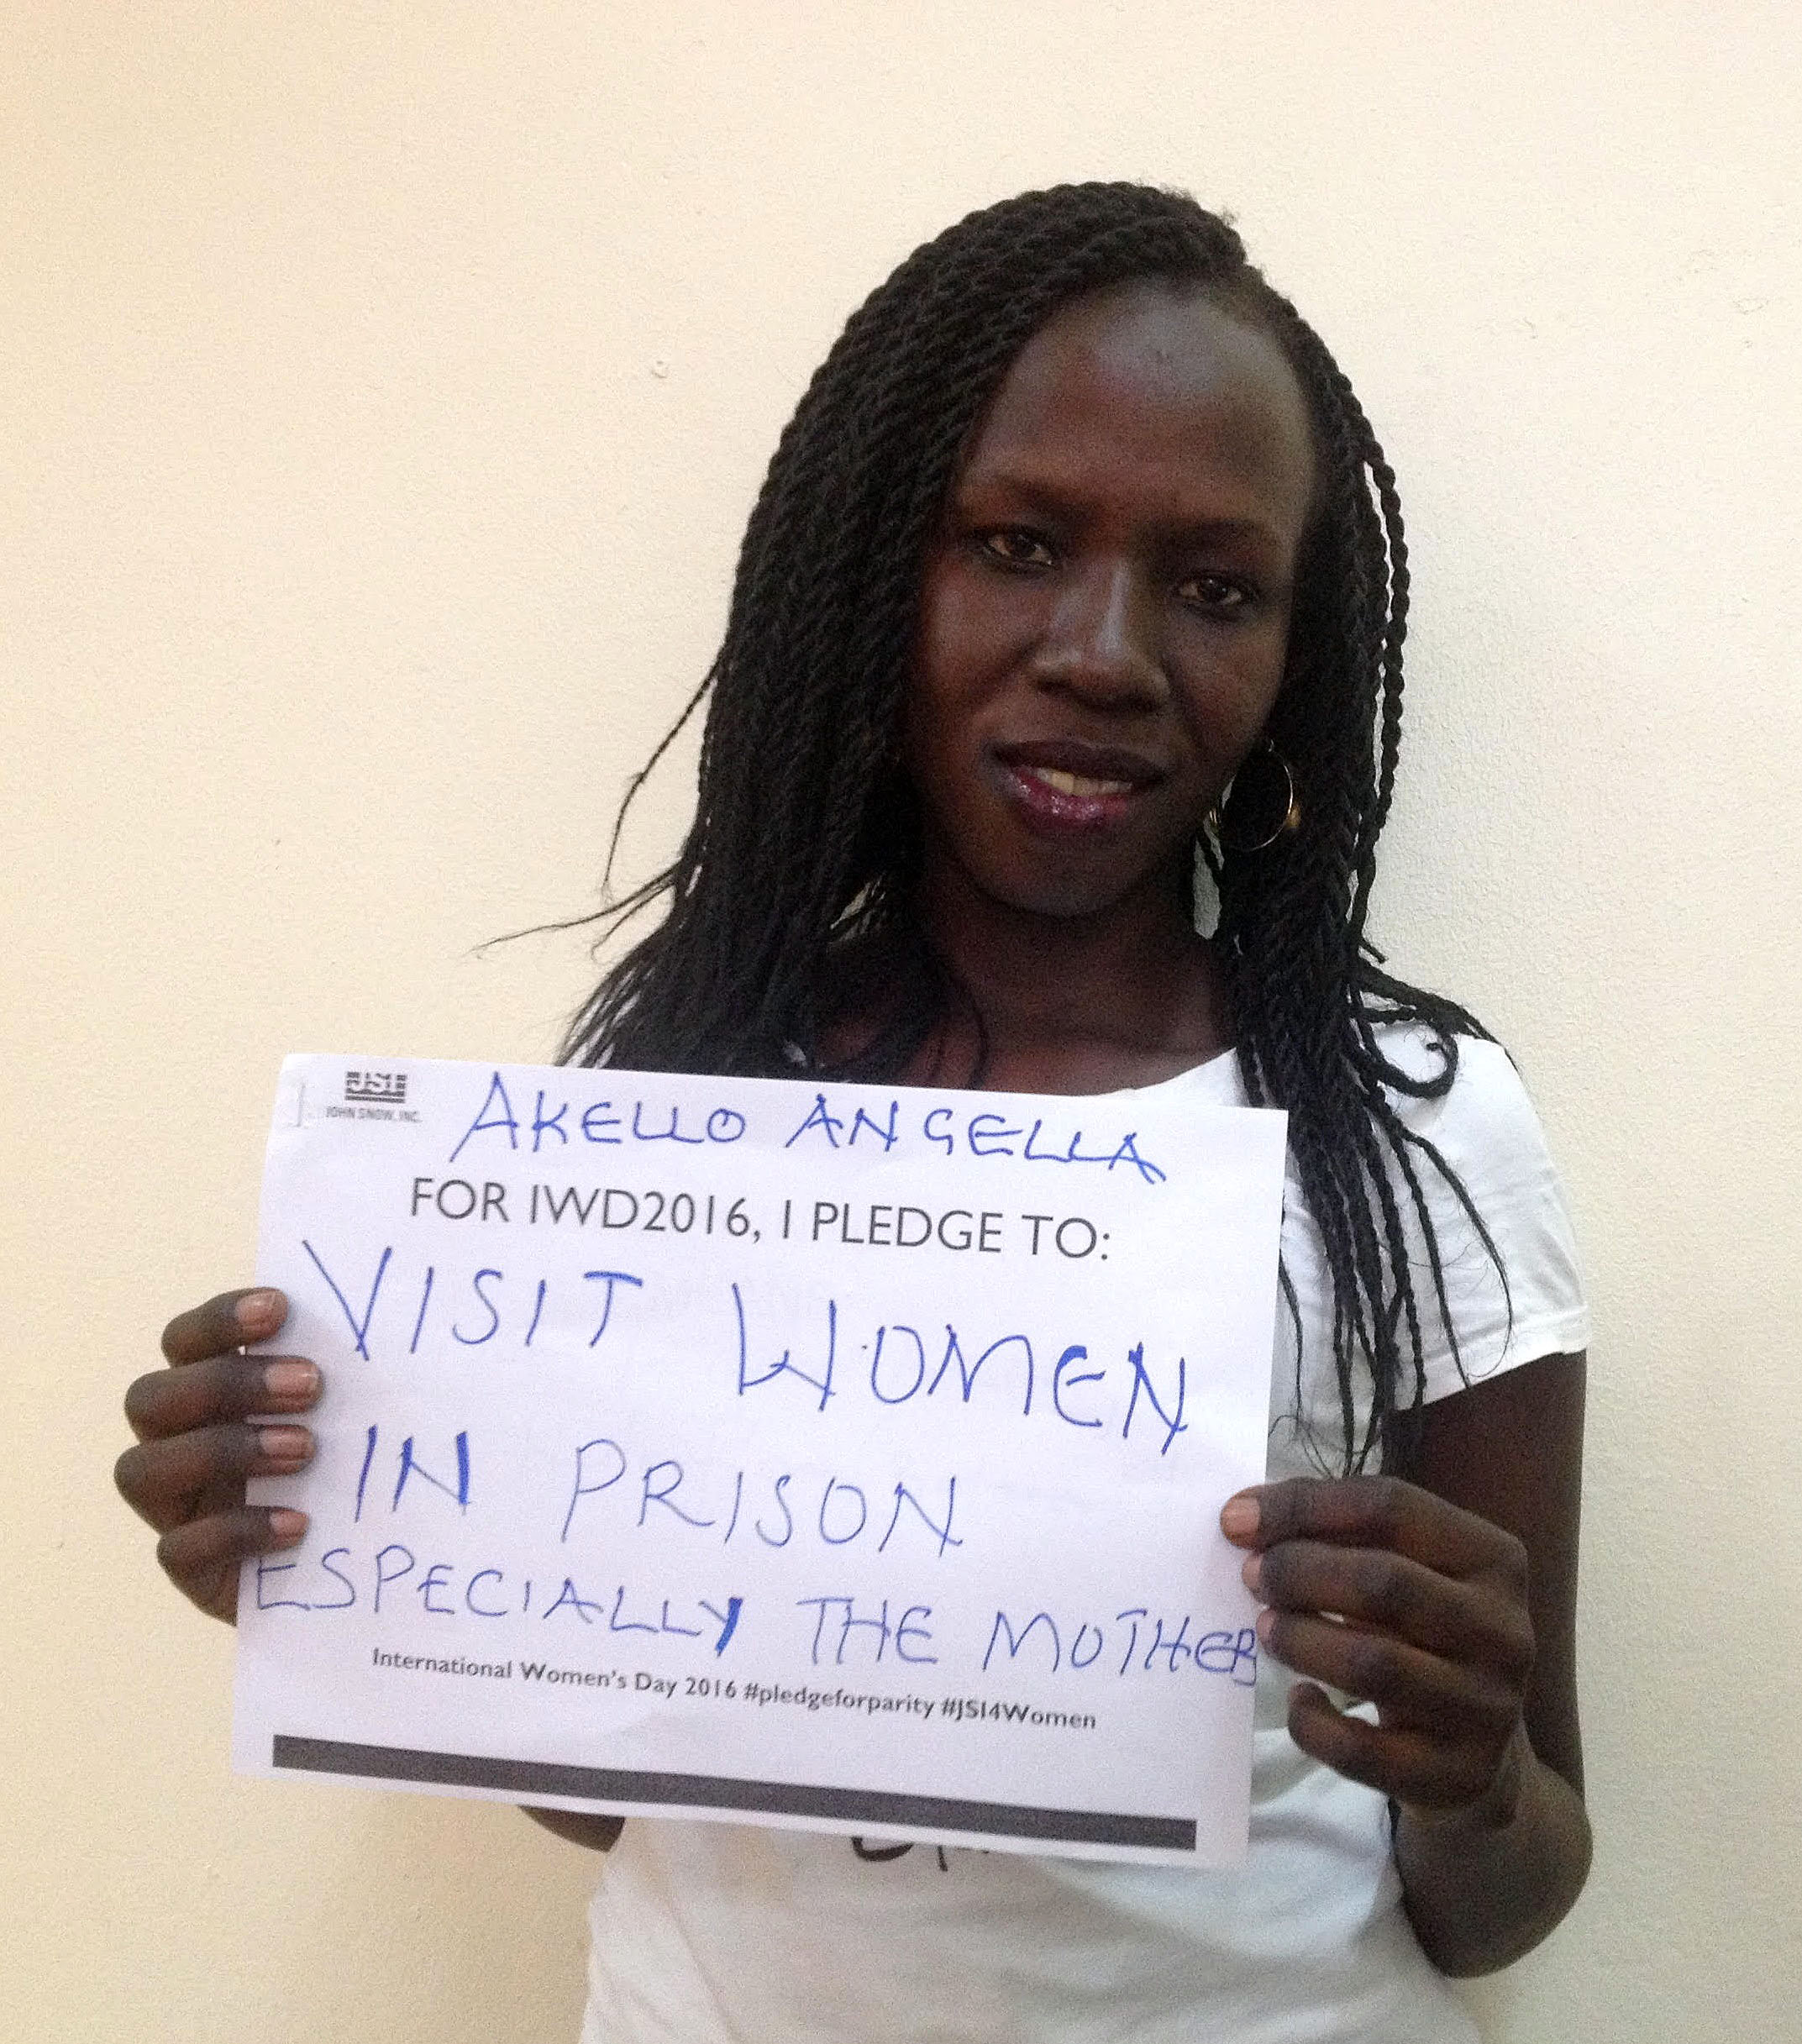 "For IWD ’16, I pledge to visit women in prison, especially the mothers"